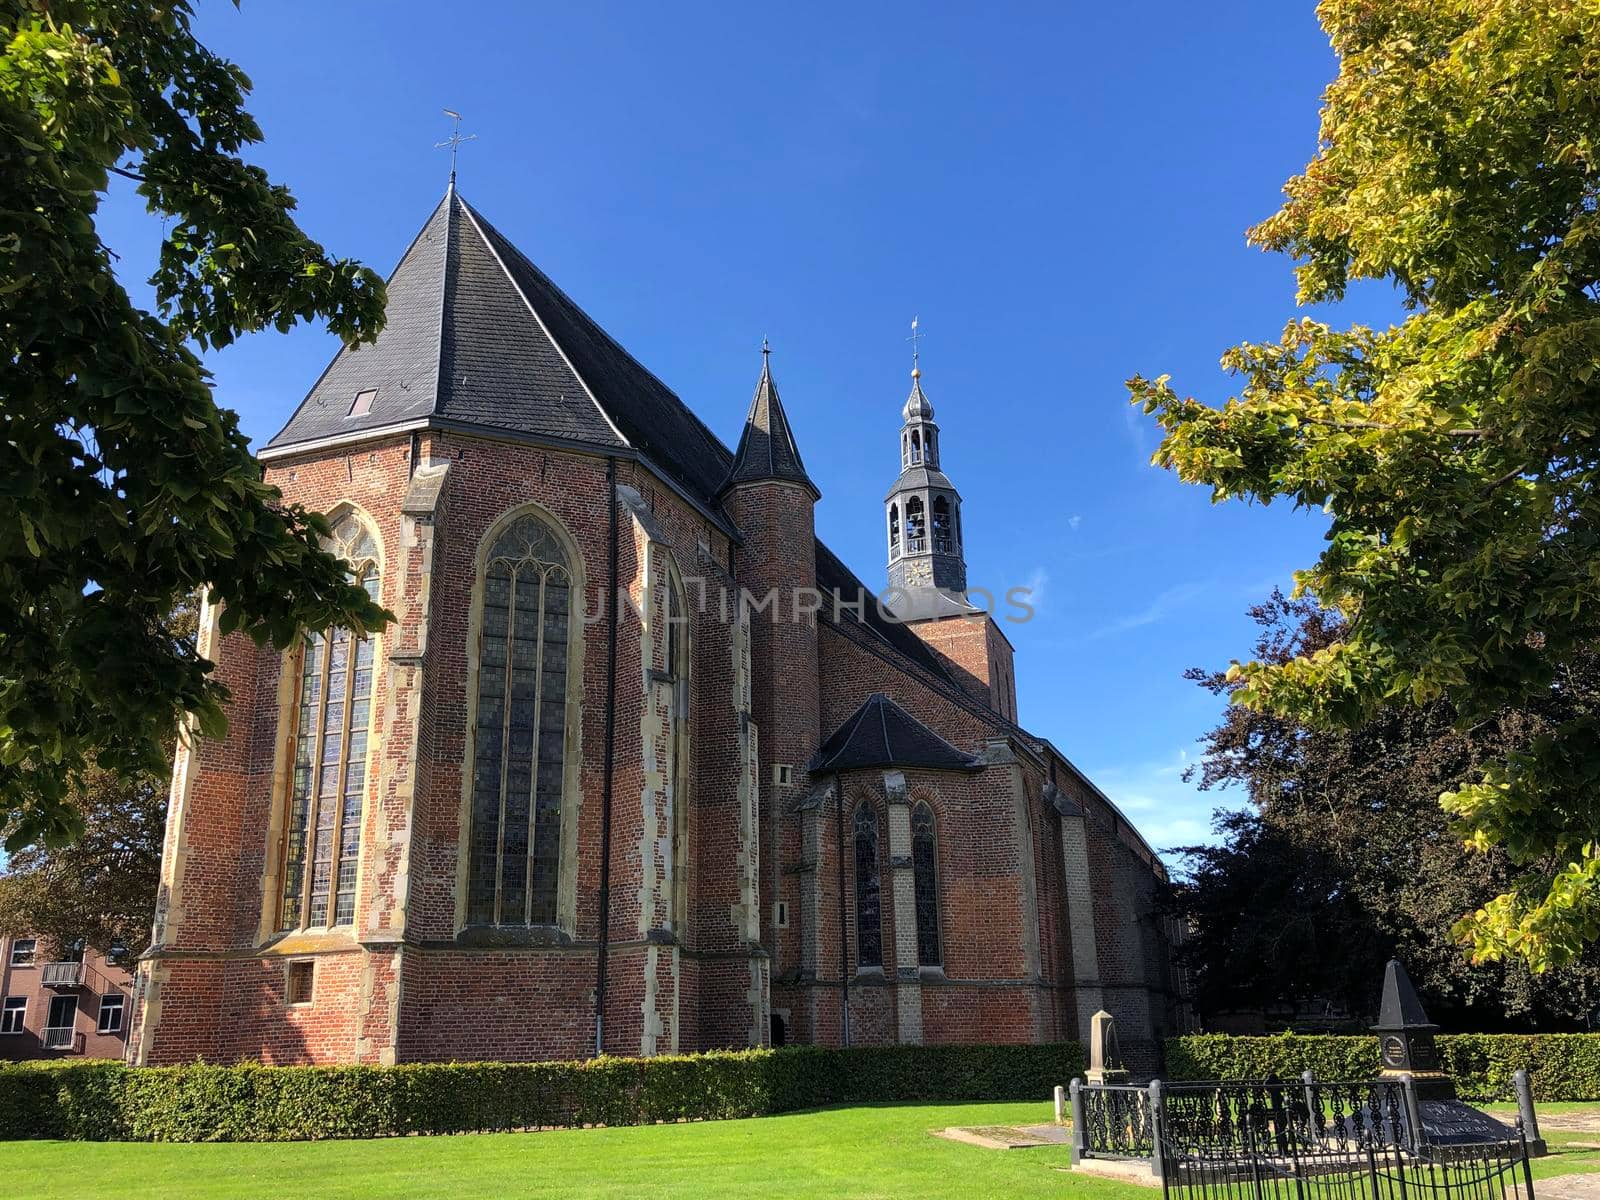 The old Calixtus church in Groenlo by traveltelly